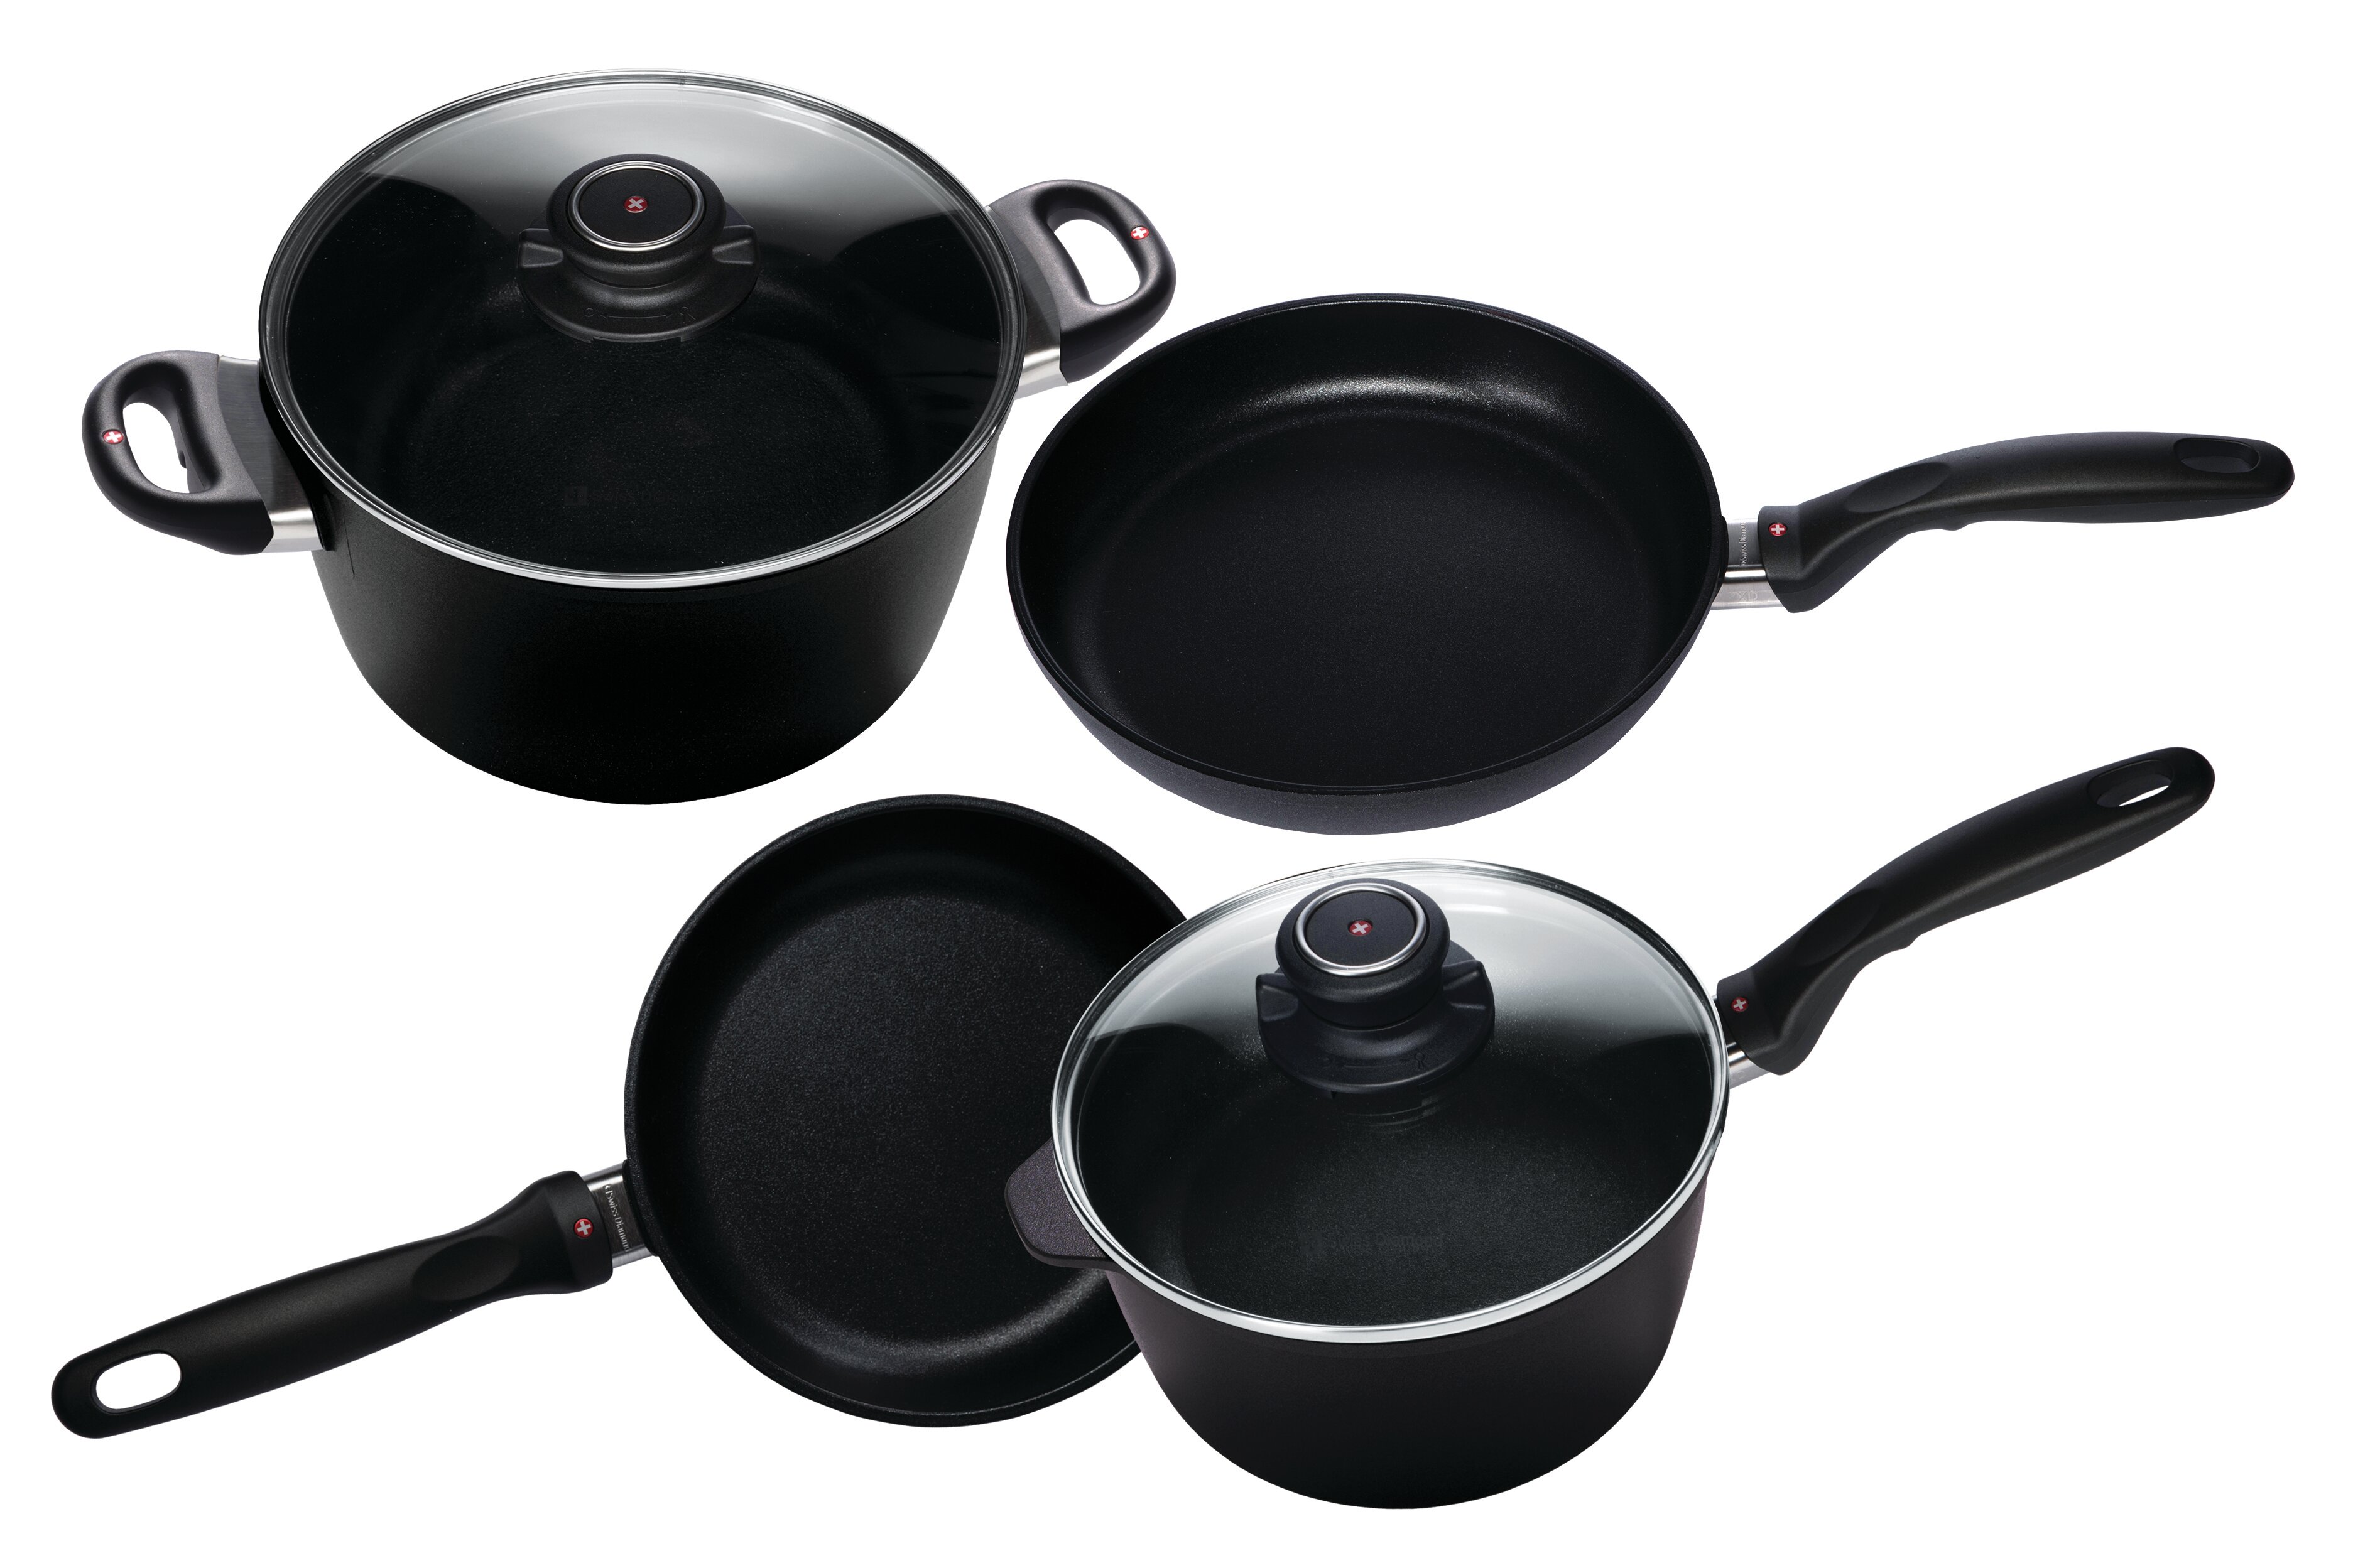 Swiss Diamond 10 Piece Kitchen Cookware Set - HD Nonstick Diamond Coated  Aluminum Cooking Pots and Pans, Includes Lids, Dishwasher Safe and Oven  Safe